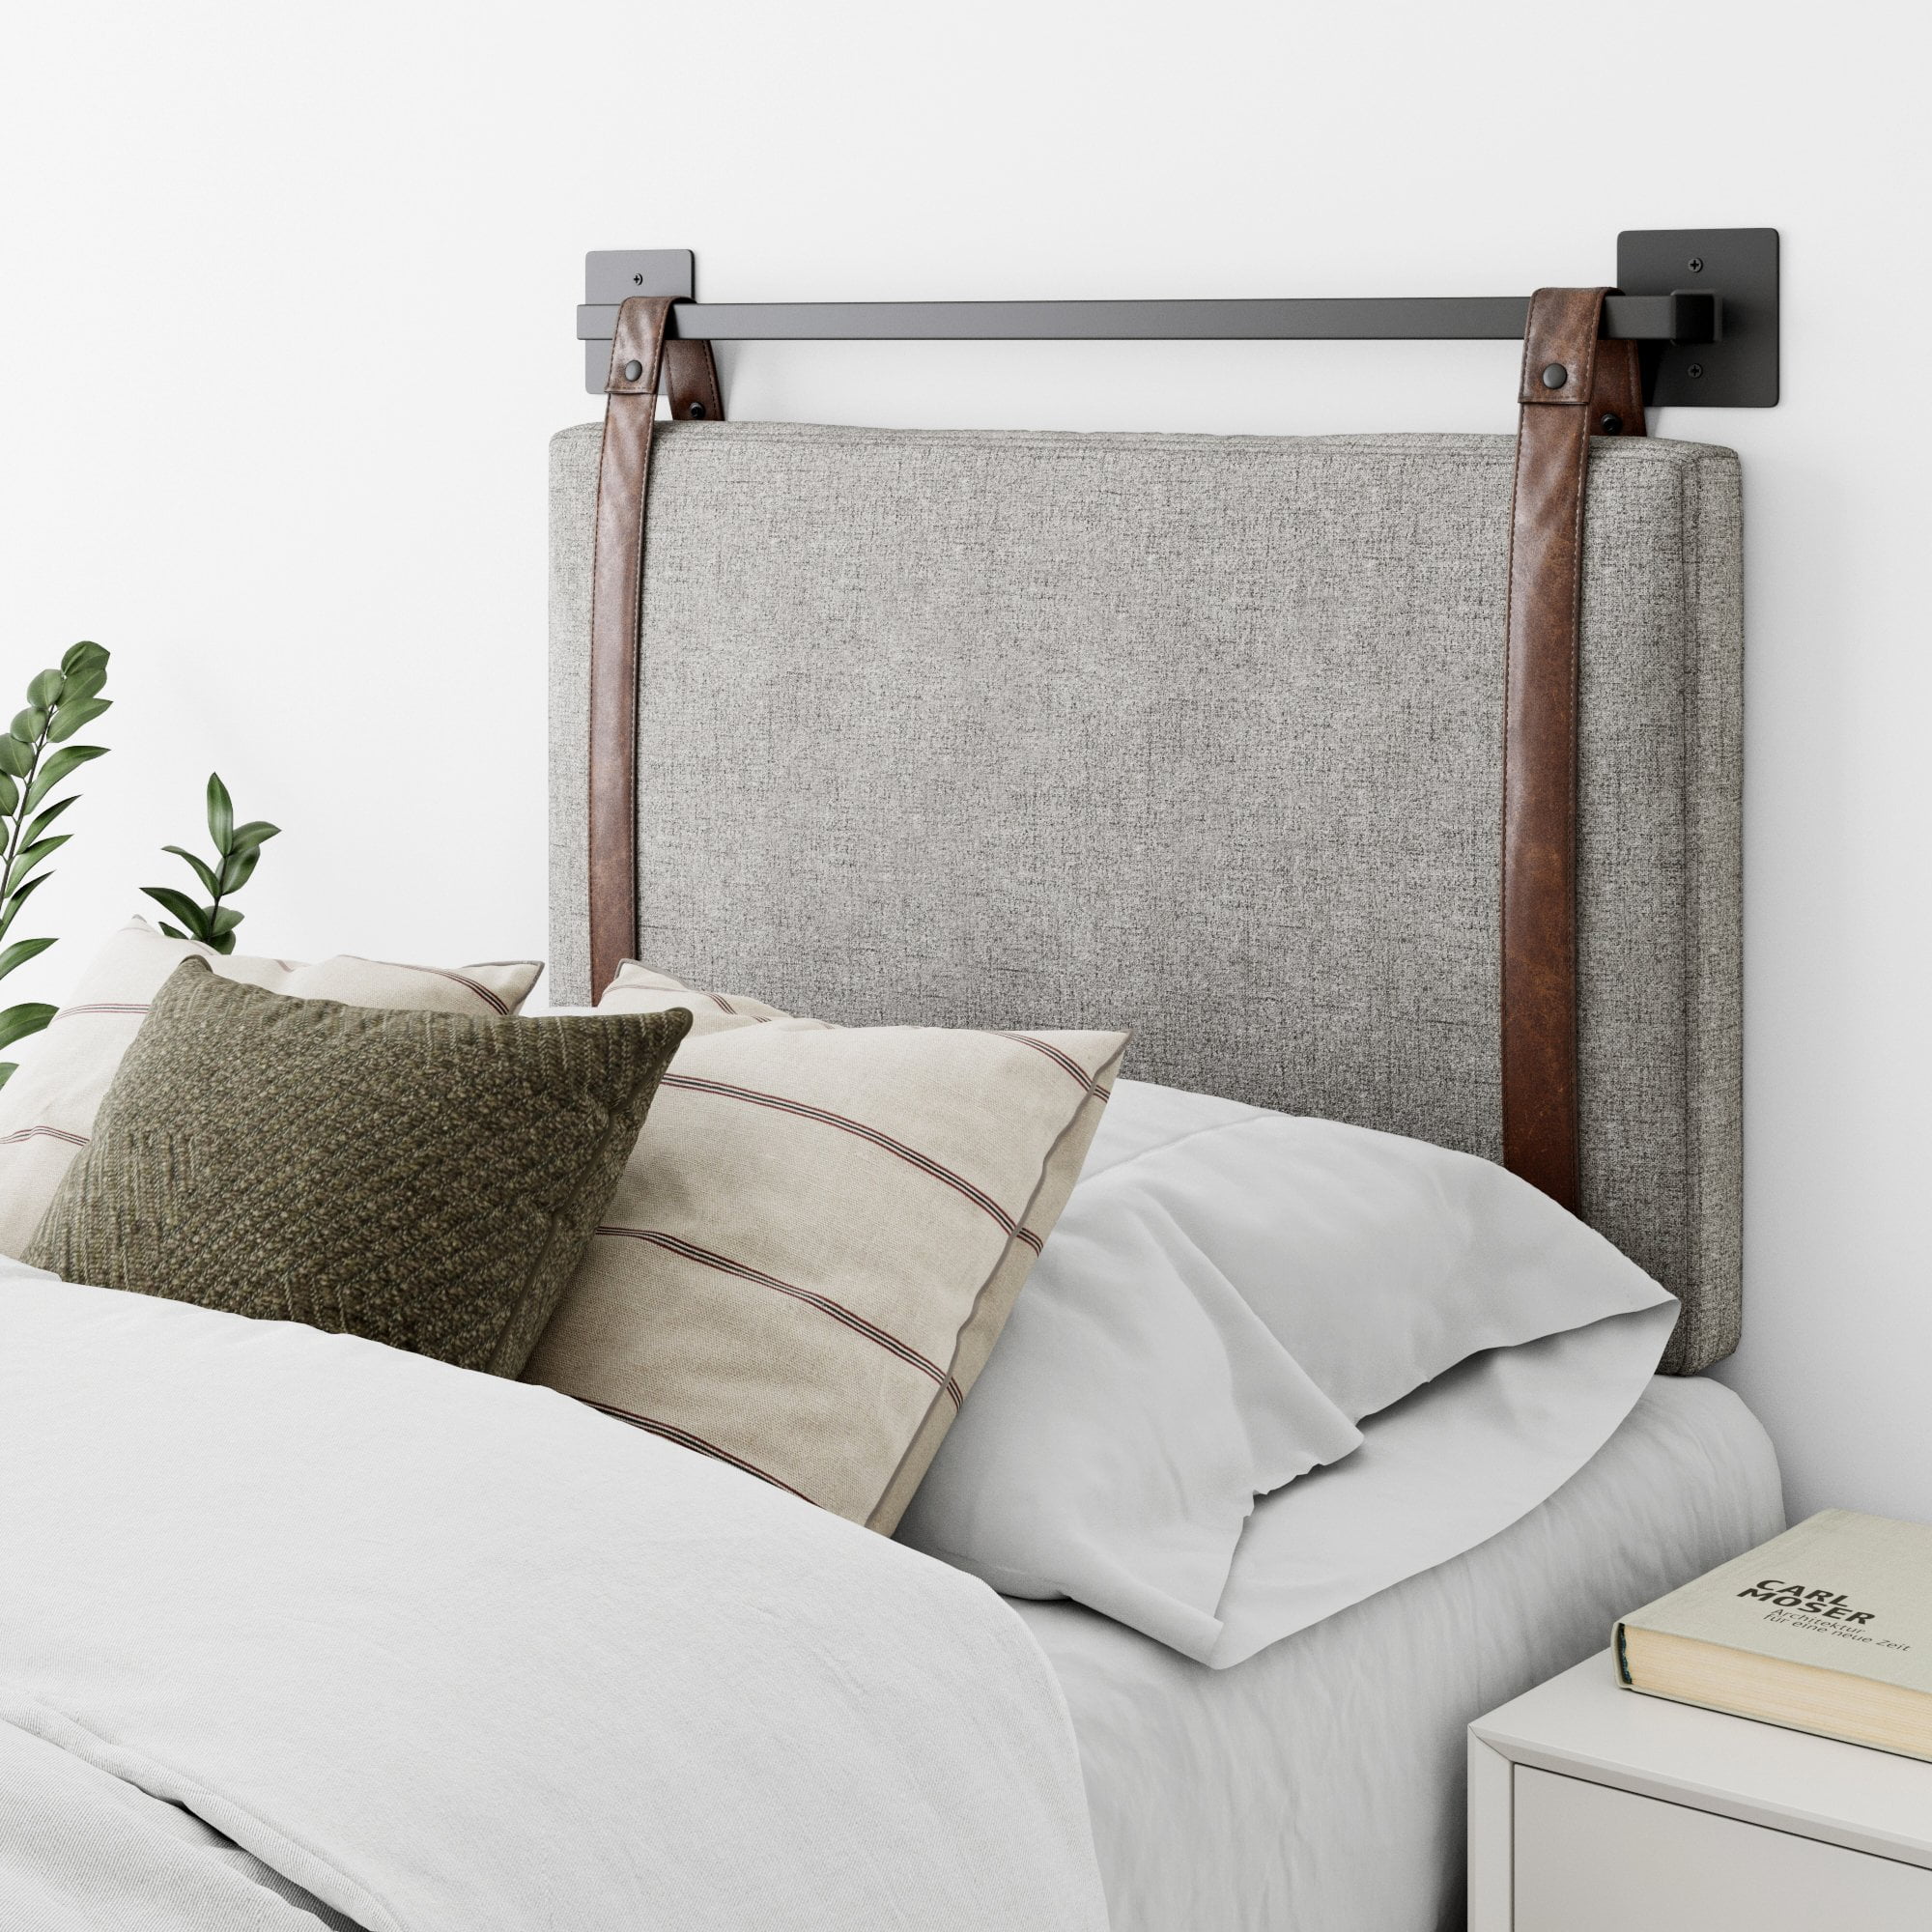 Nathan James Harlow Twin Wall Mount, How To Attach Large Headboard Wall